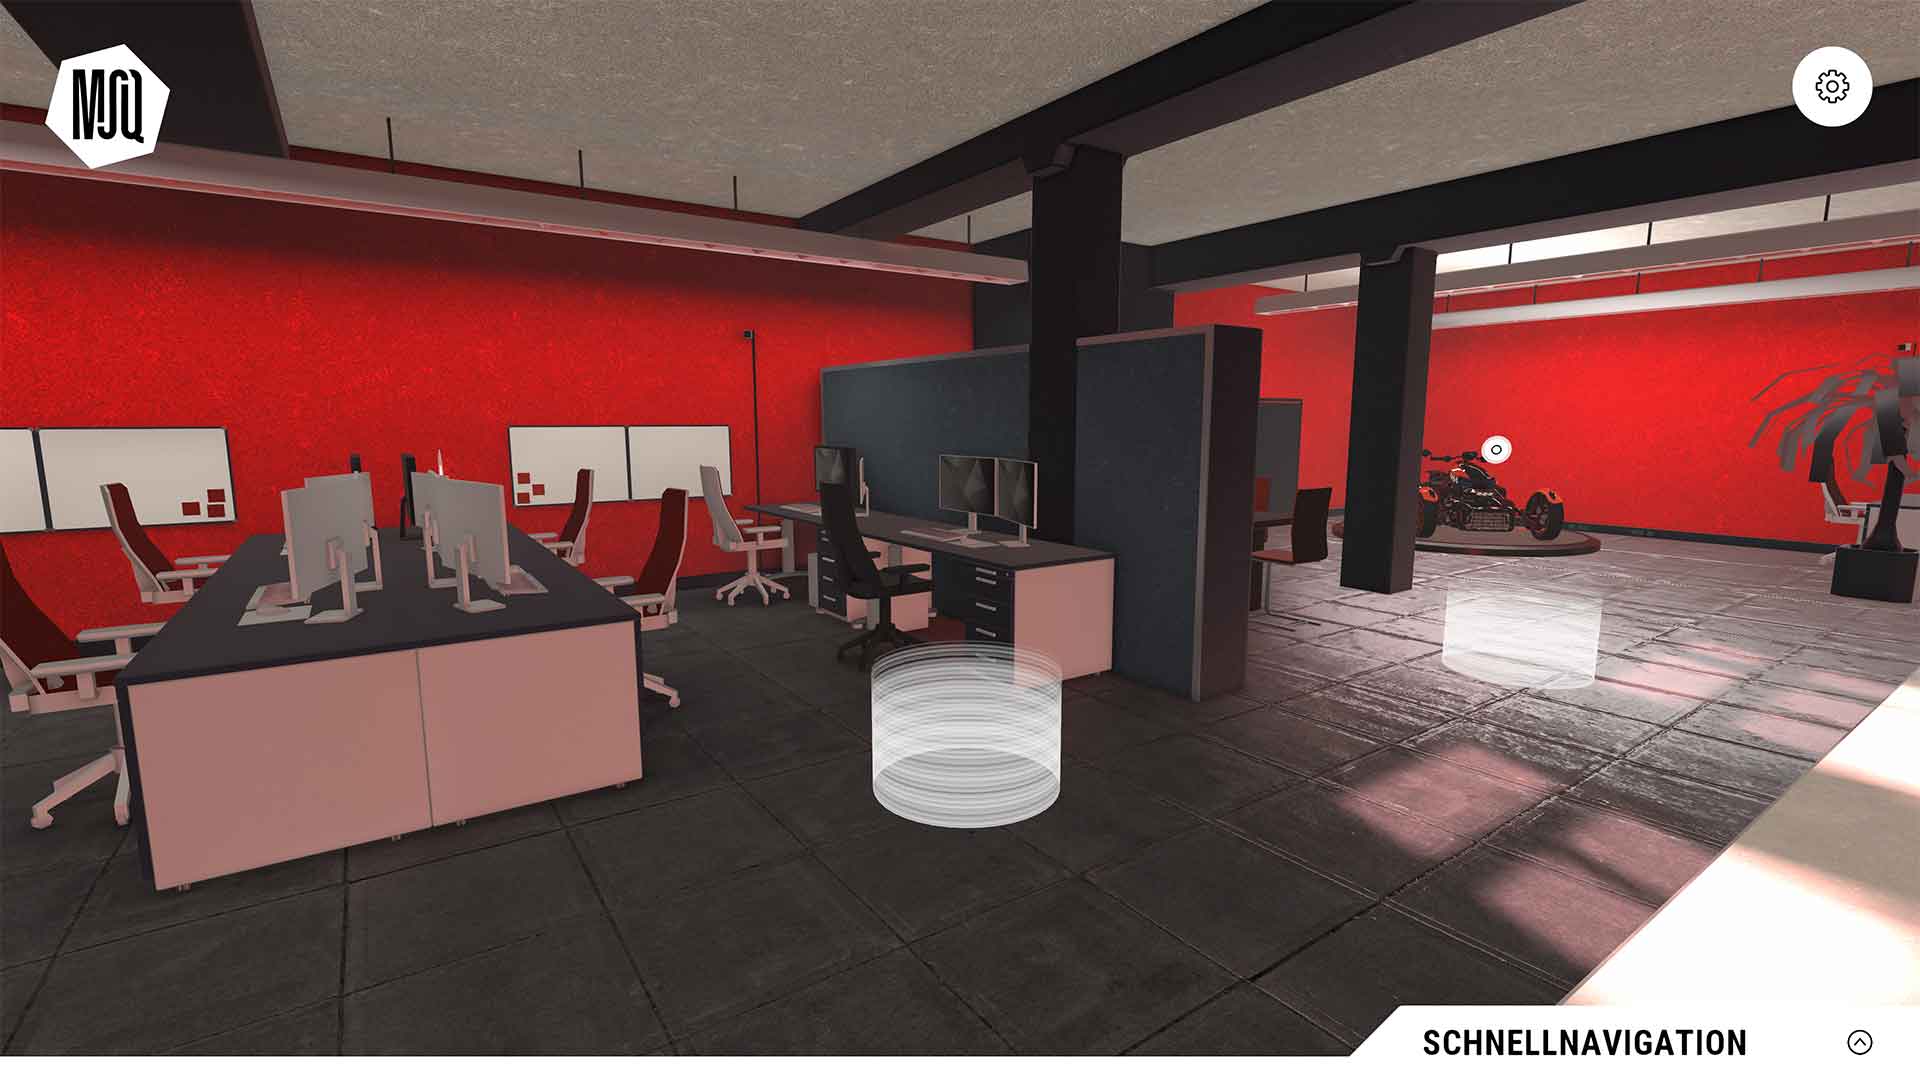 The MEDIASQUAD showroom lets you discover what is currently possible using WebGL technology.